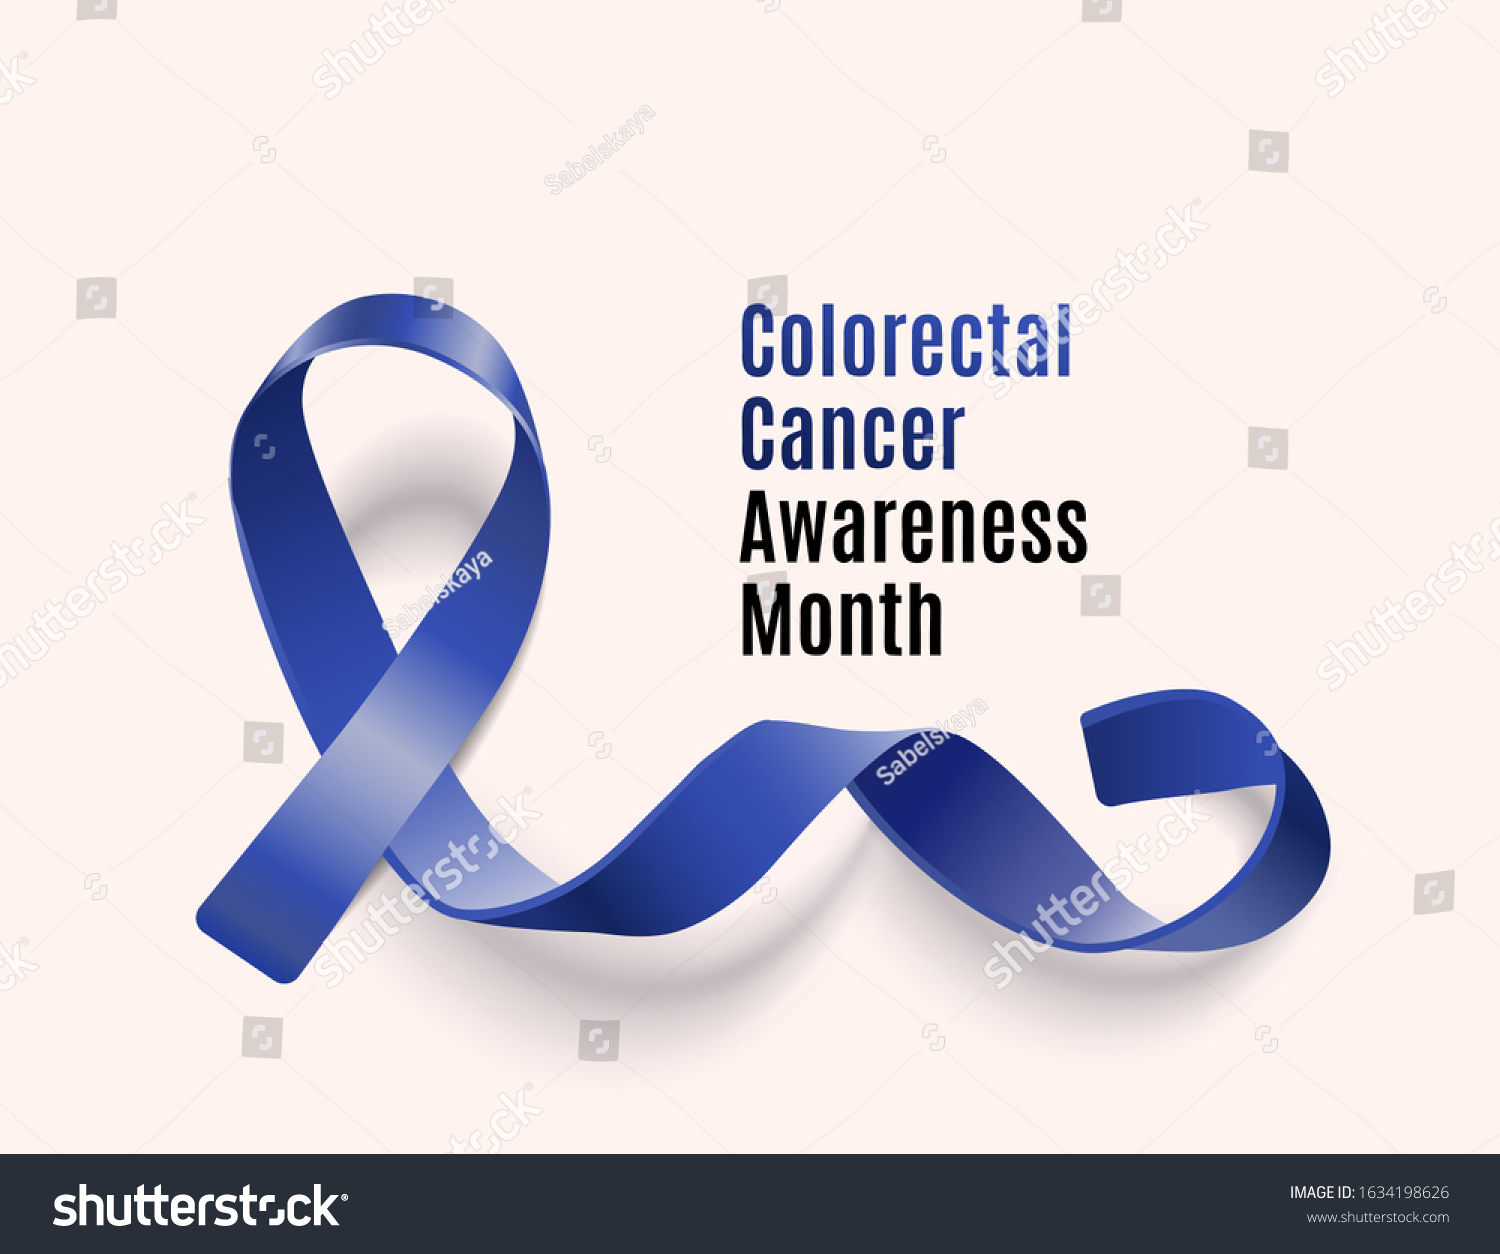 Colorectal Cancer Awareness Month Banner Realistic Stock Vector Royalty Free